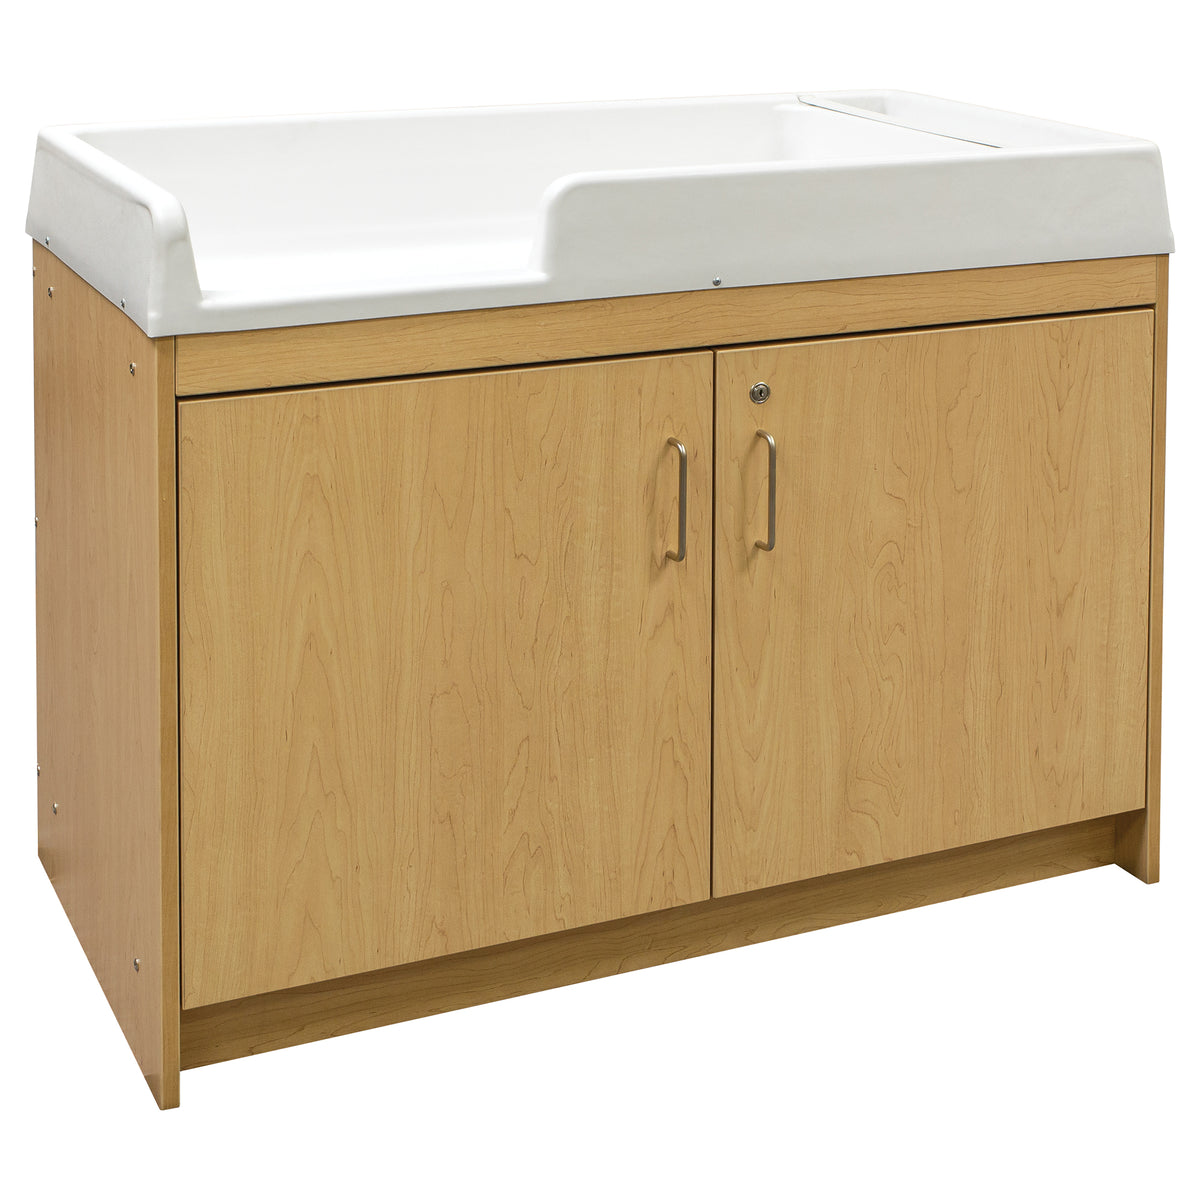 Infant Changing Table With Maple Wood Lockable Doors.